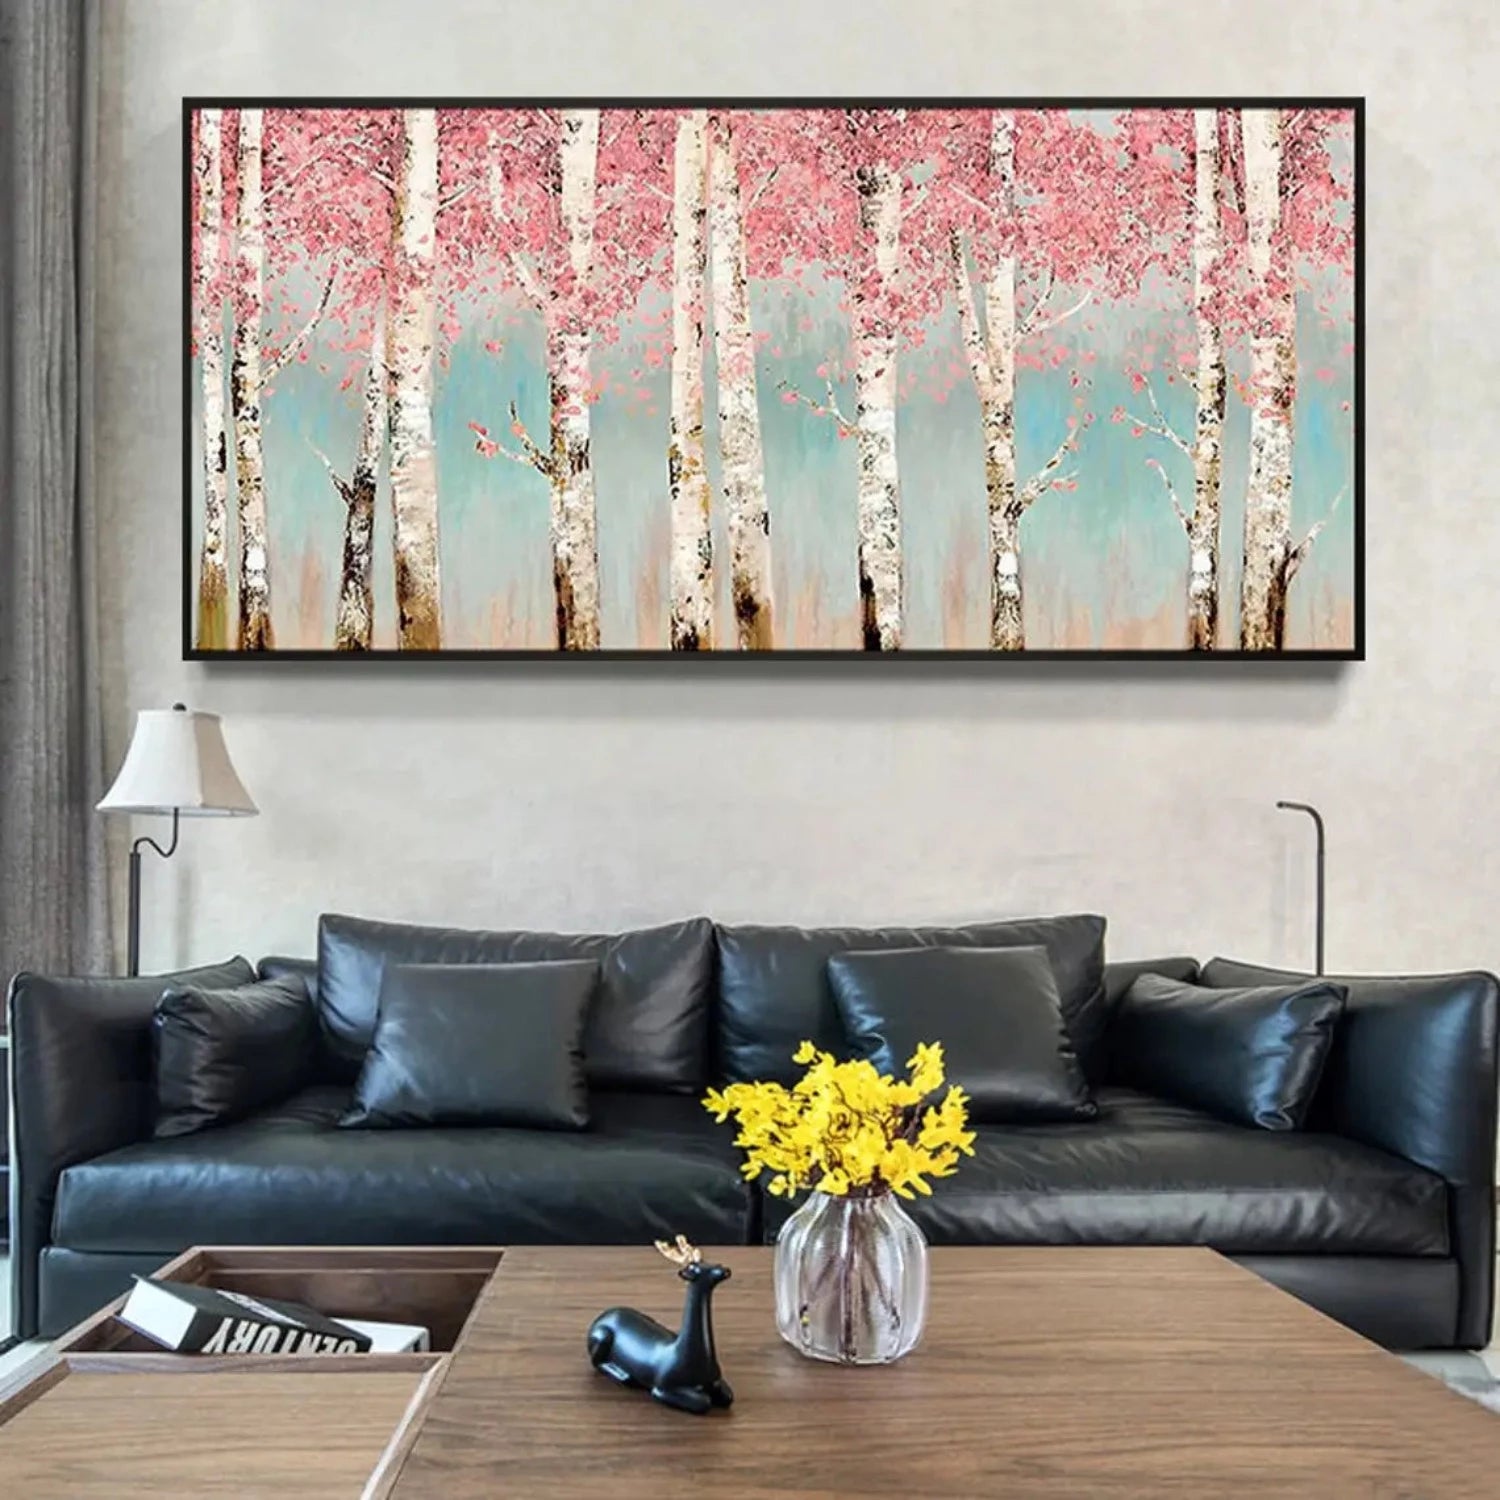 Abstract Pink Birch Forest Landscape Oil Painting